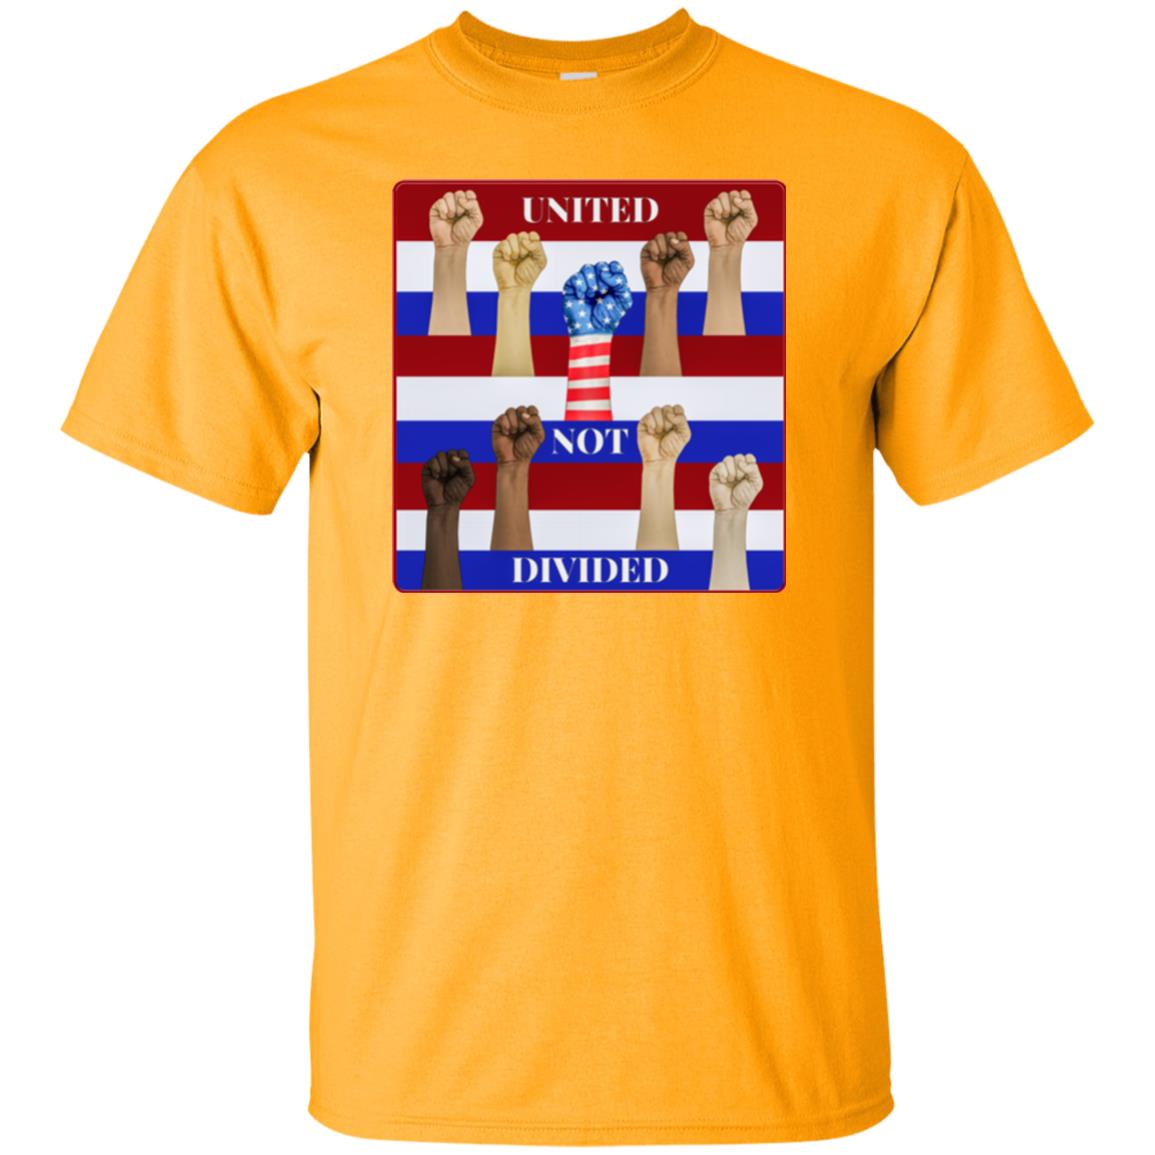 united not divided - Men's Classic Fit T-Shirt